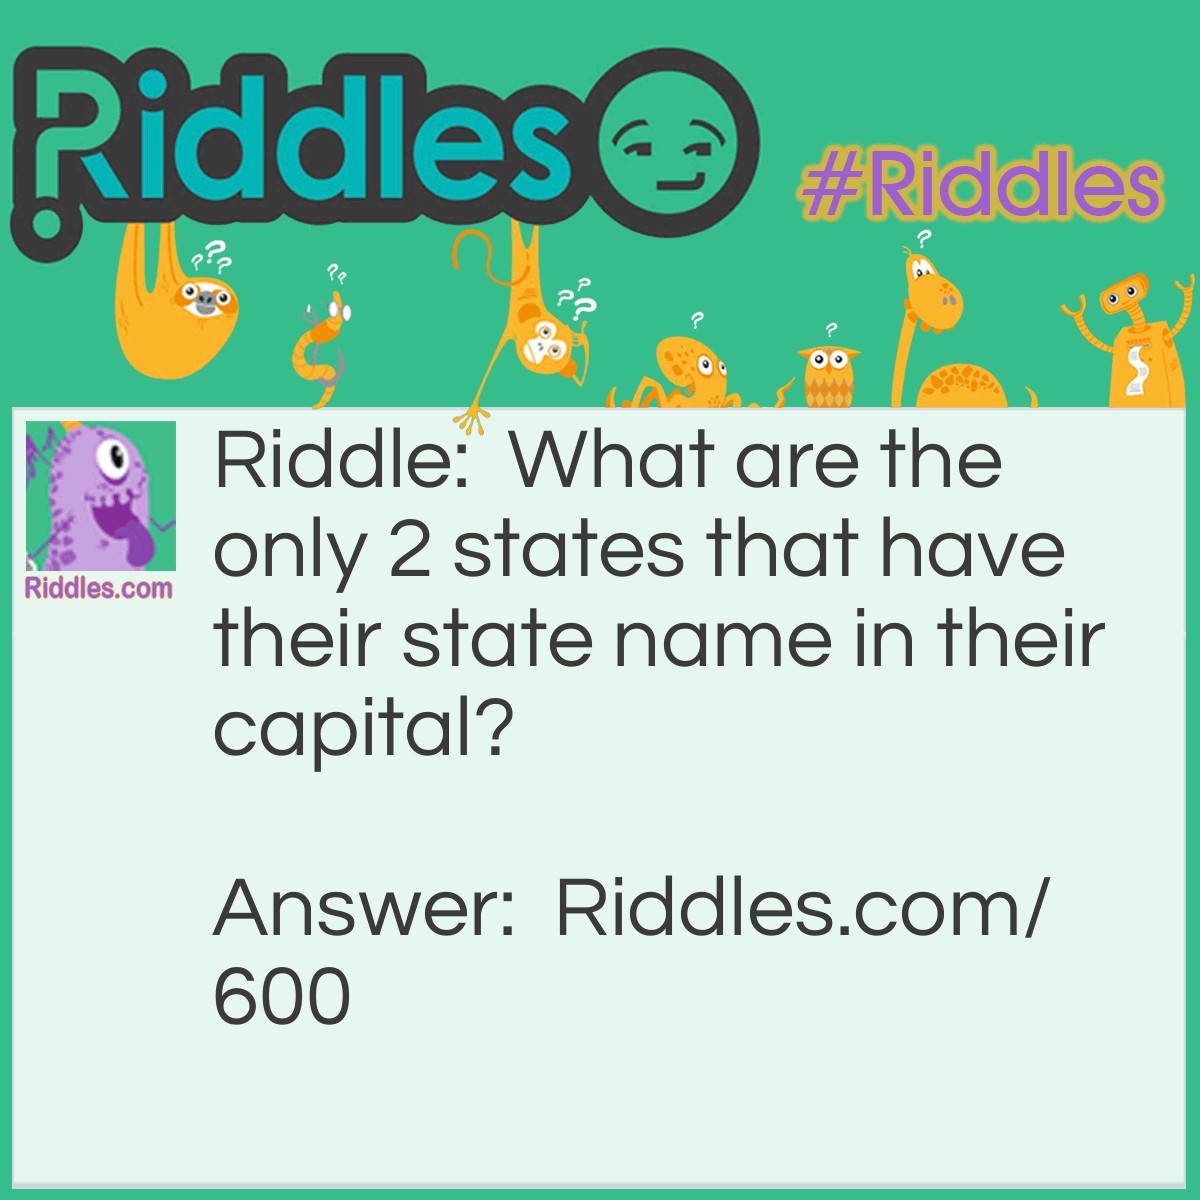 Riddle: What are the only 2 states that have their state name in their capital? Answer: Oklahoma City and Indianapolis.